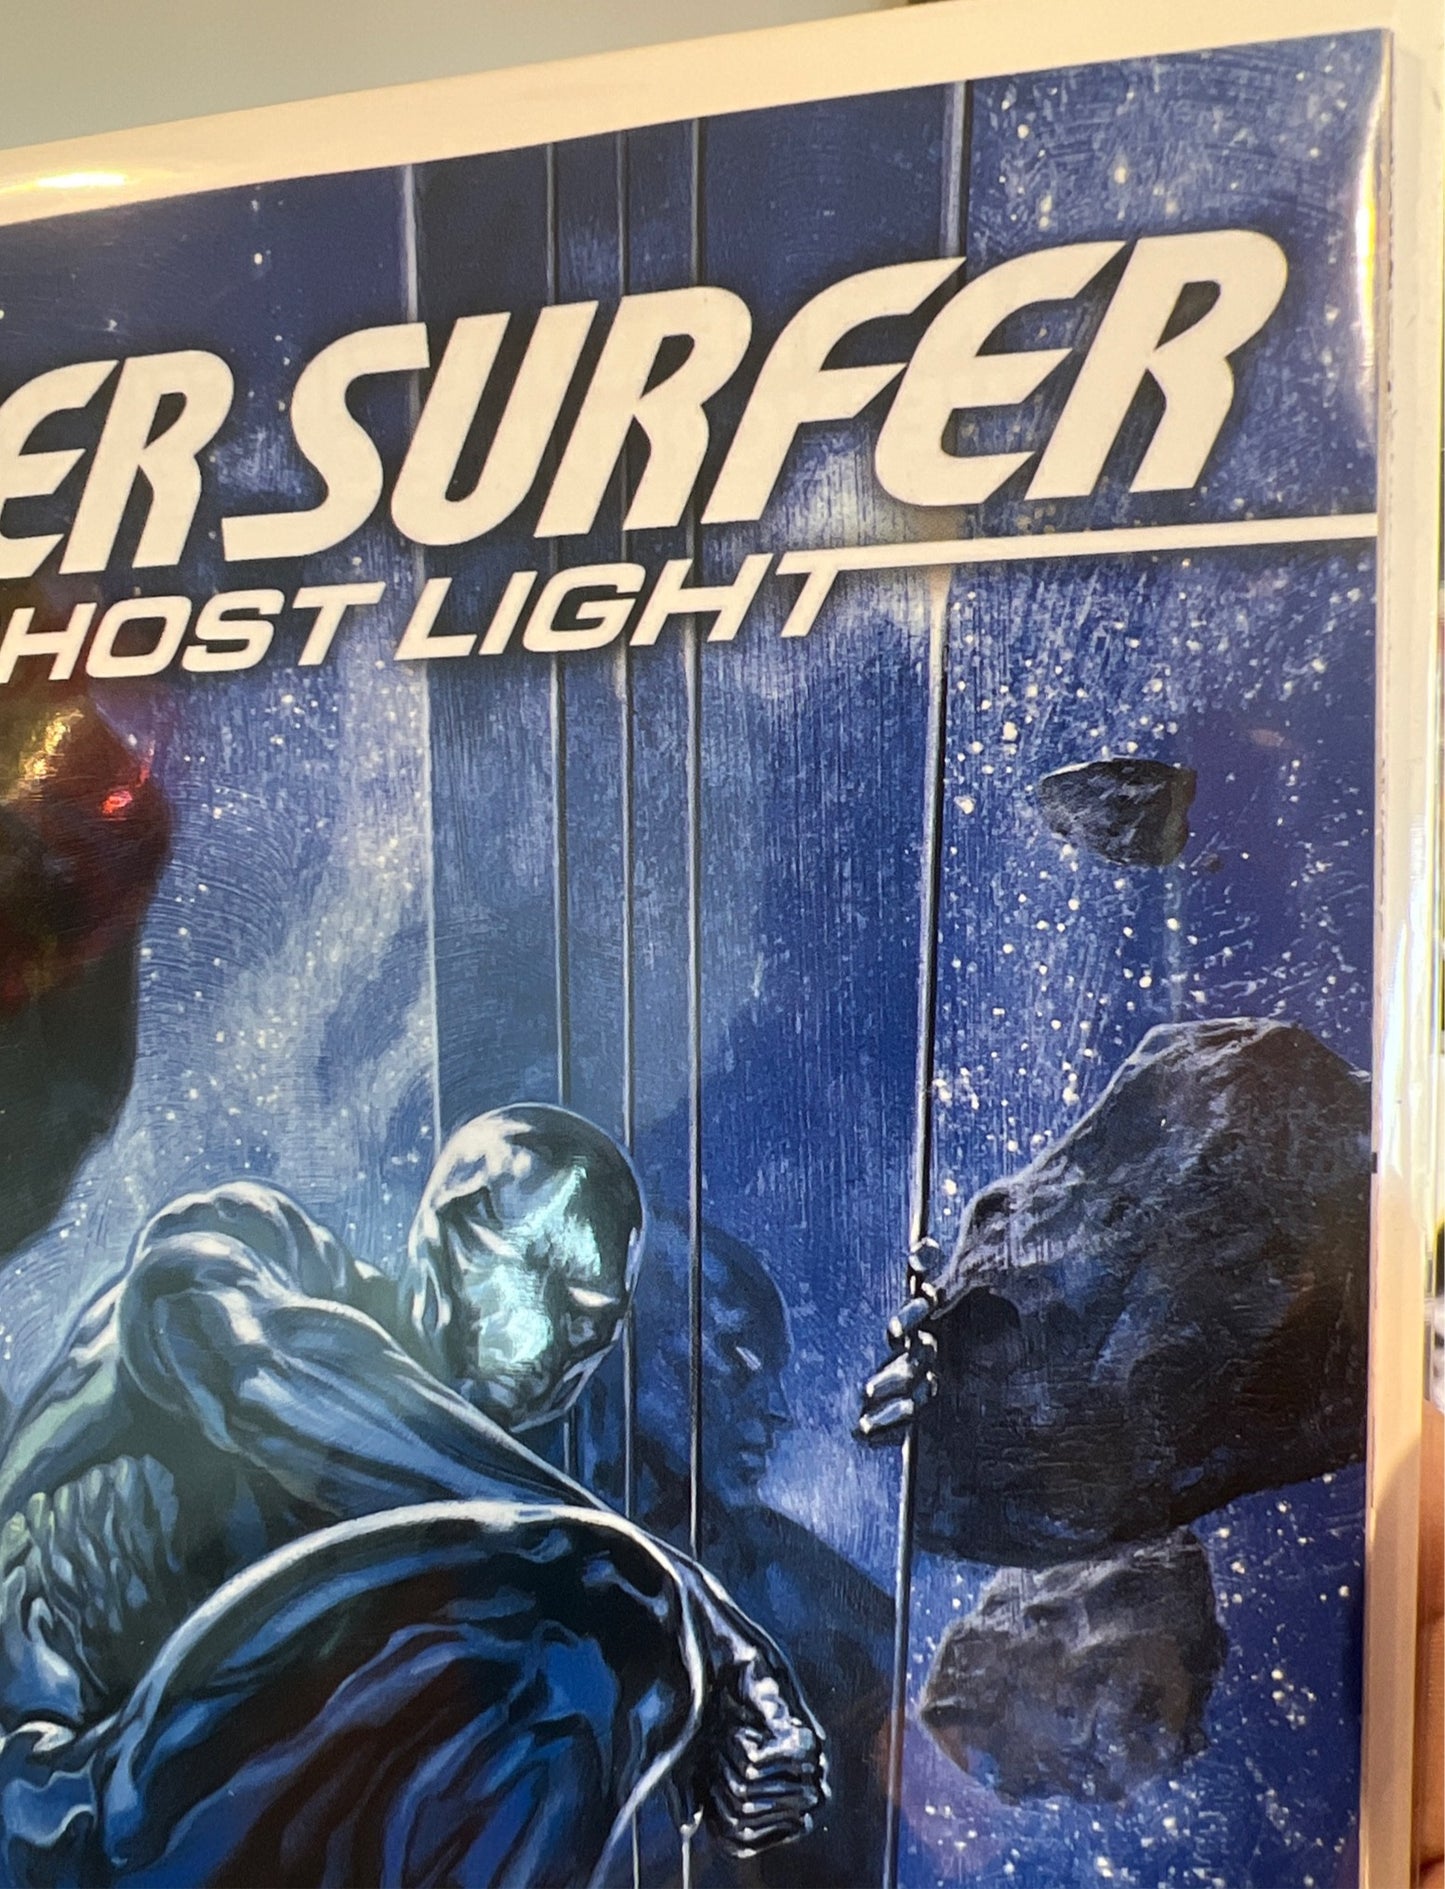 Silver Surfer: Ghost Light #1 (Singapore Comic Con Trade Dress Variant)